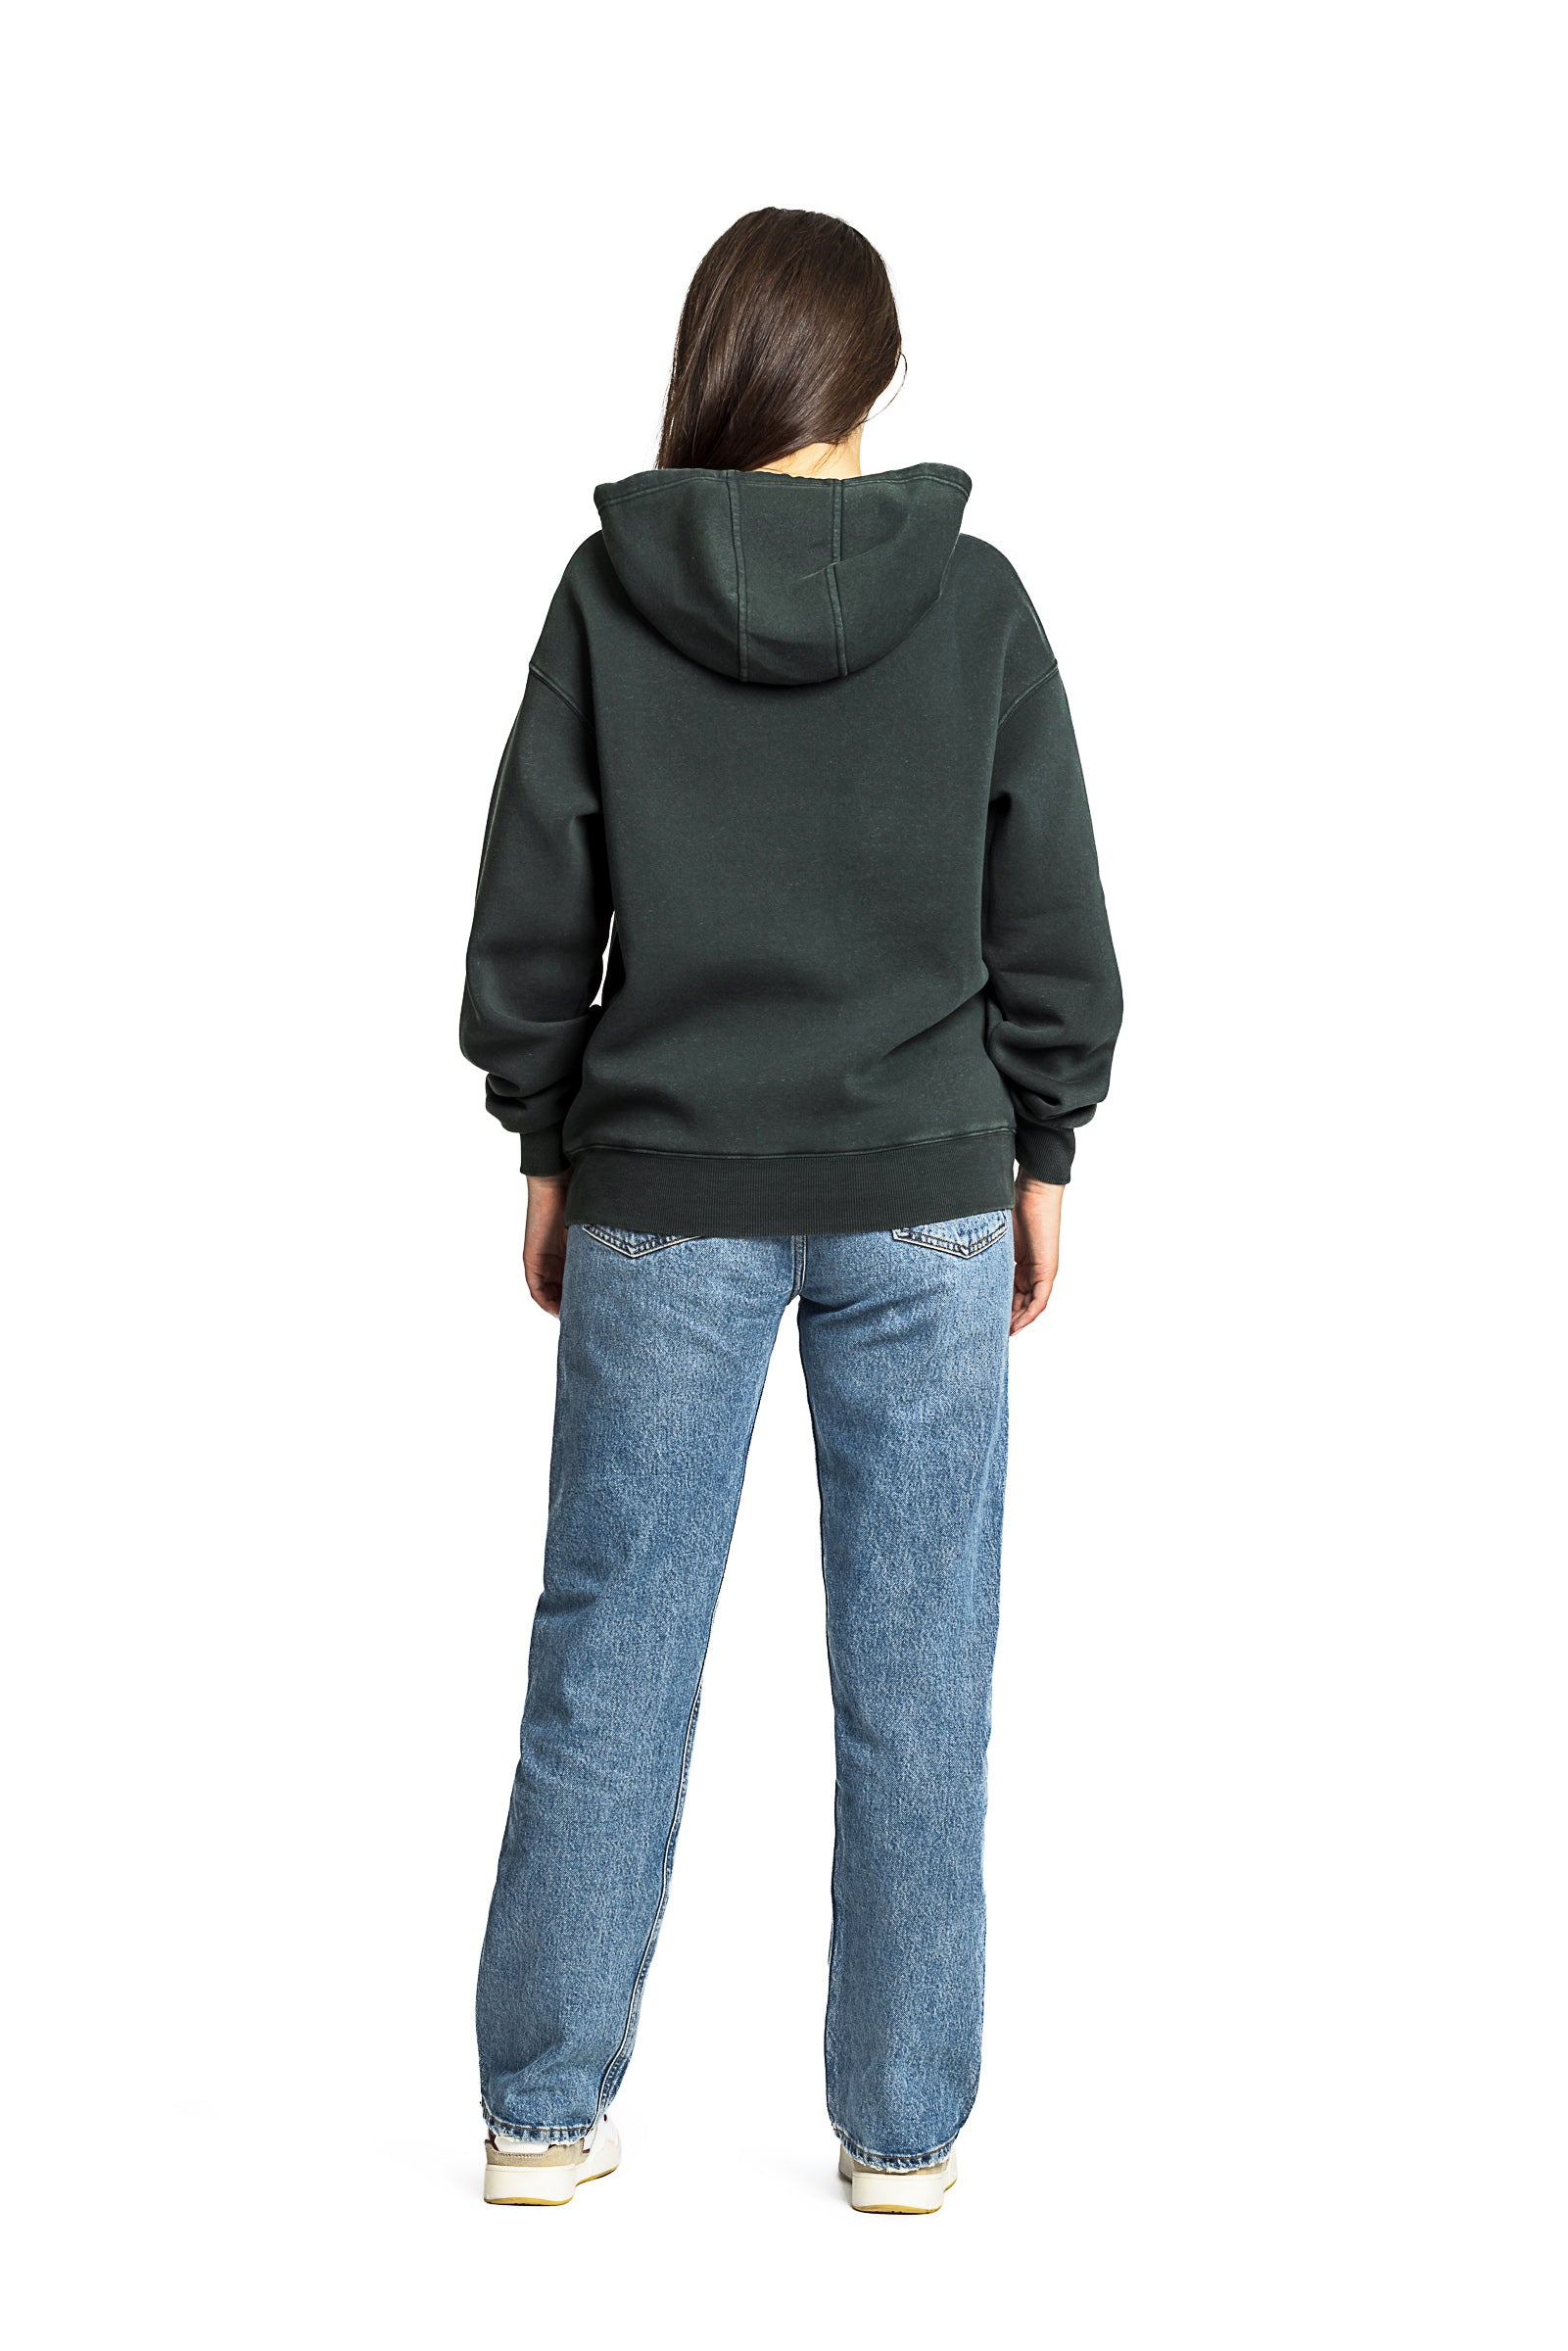 Chlo Relaxed Fit Hoodie in Vintage Midnight Green